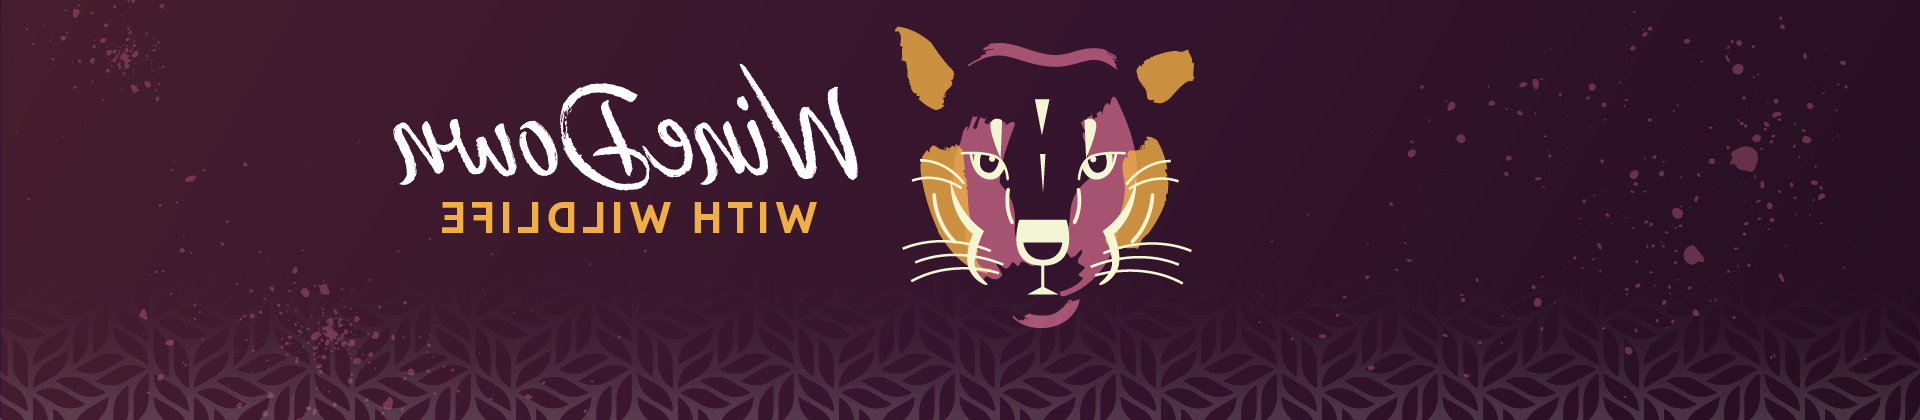 Winedown Page header image